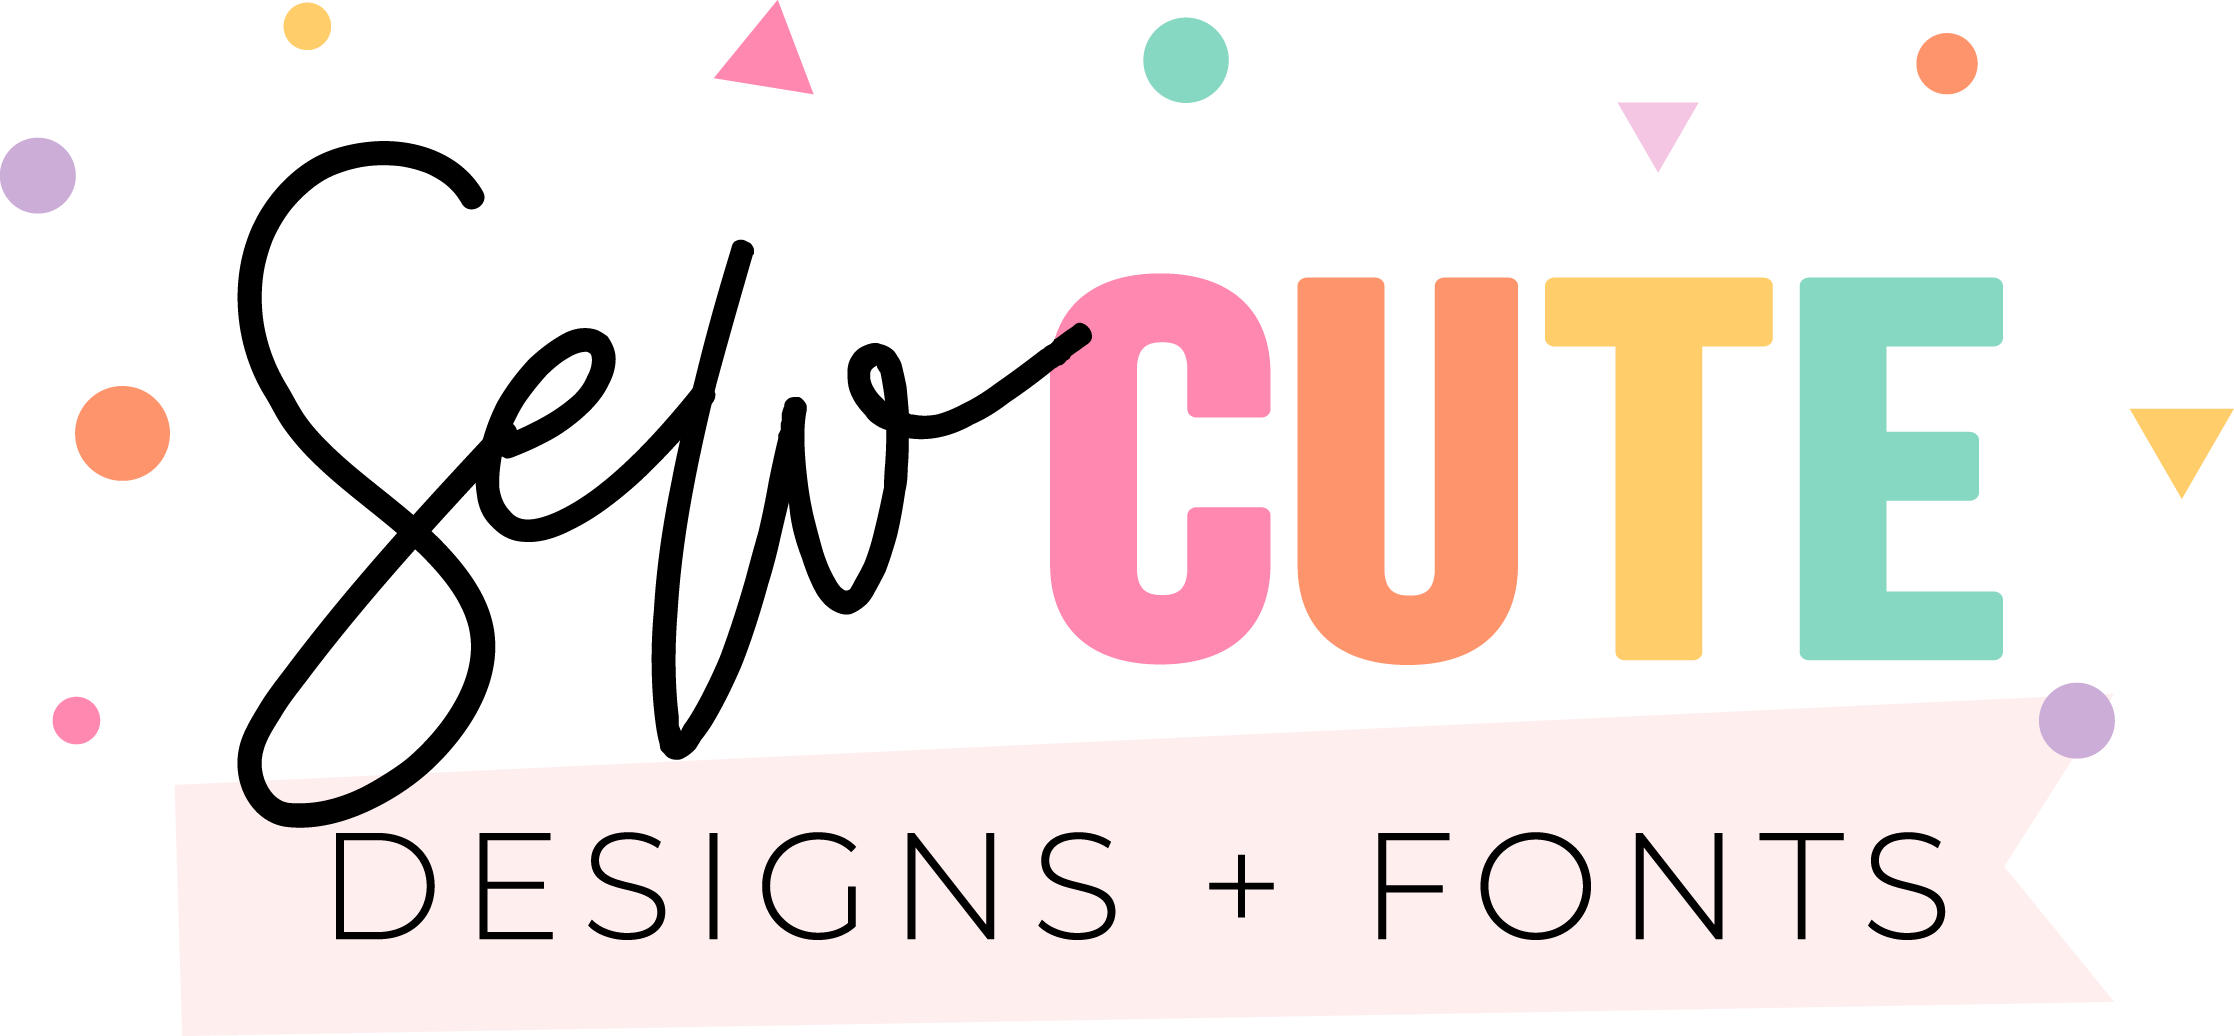 Sew Cute Designs and Fonts Logo